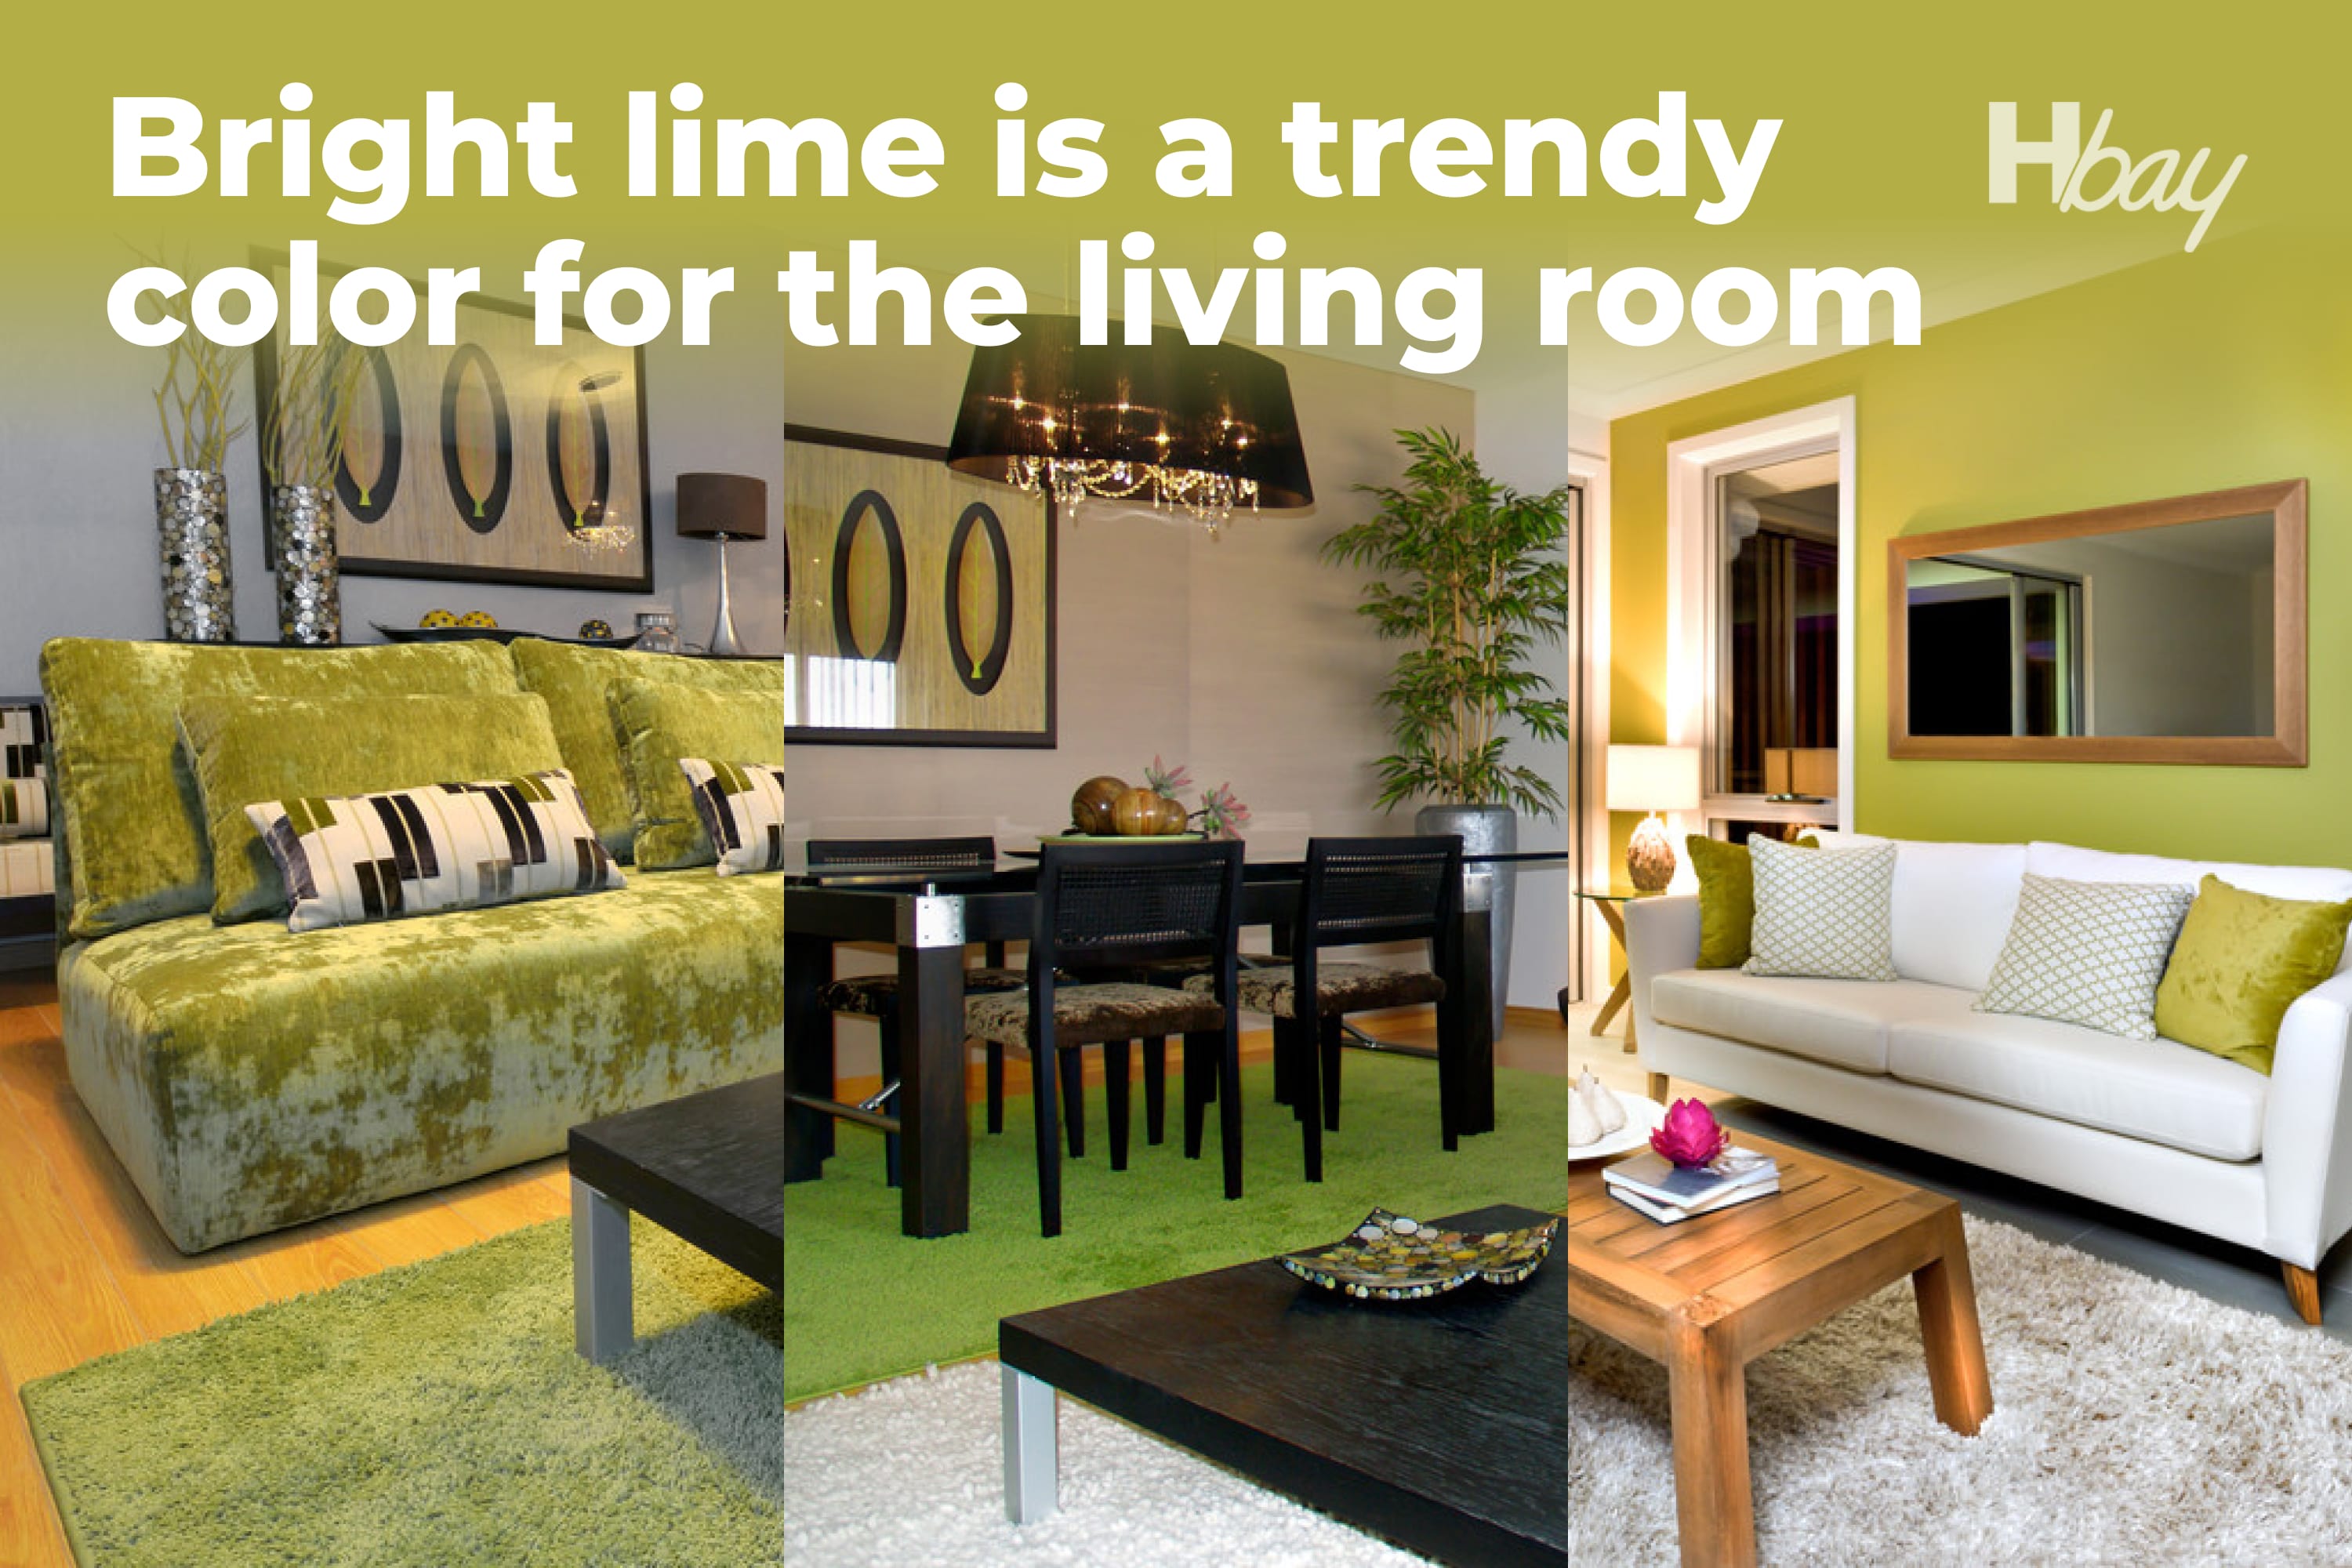 Bright lime is a trendy color for the living room